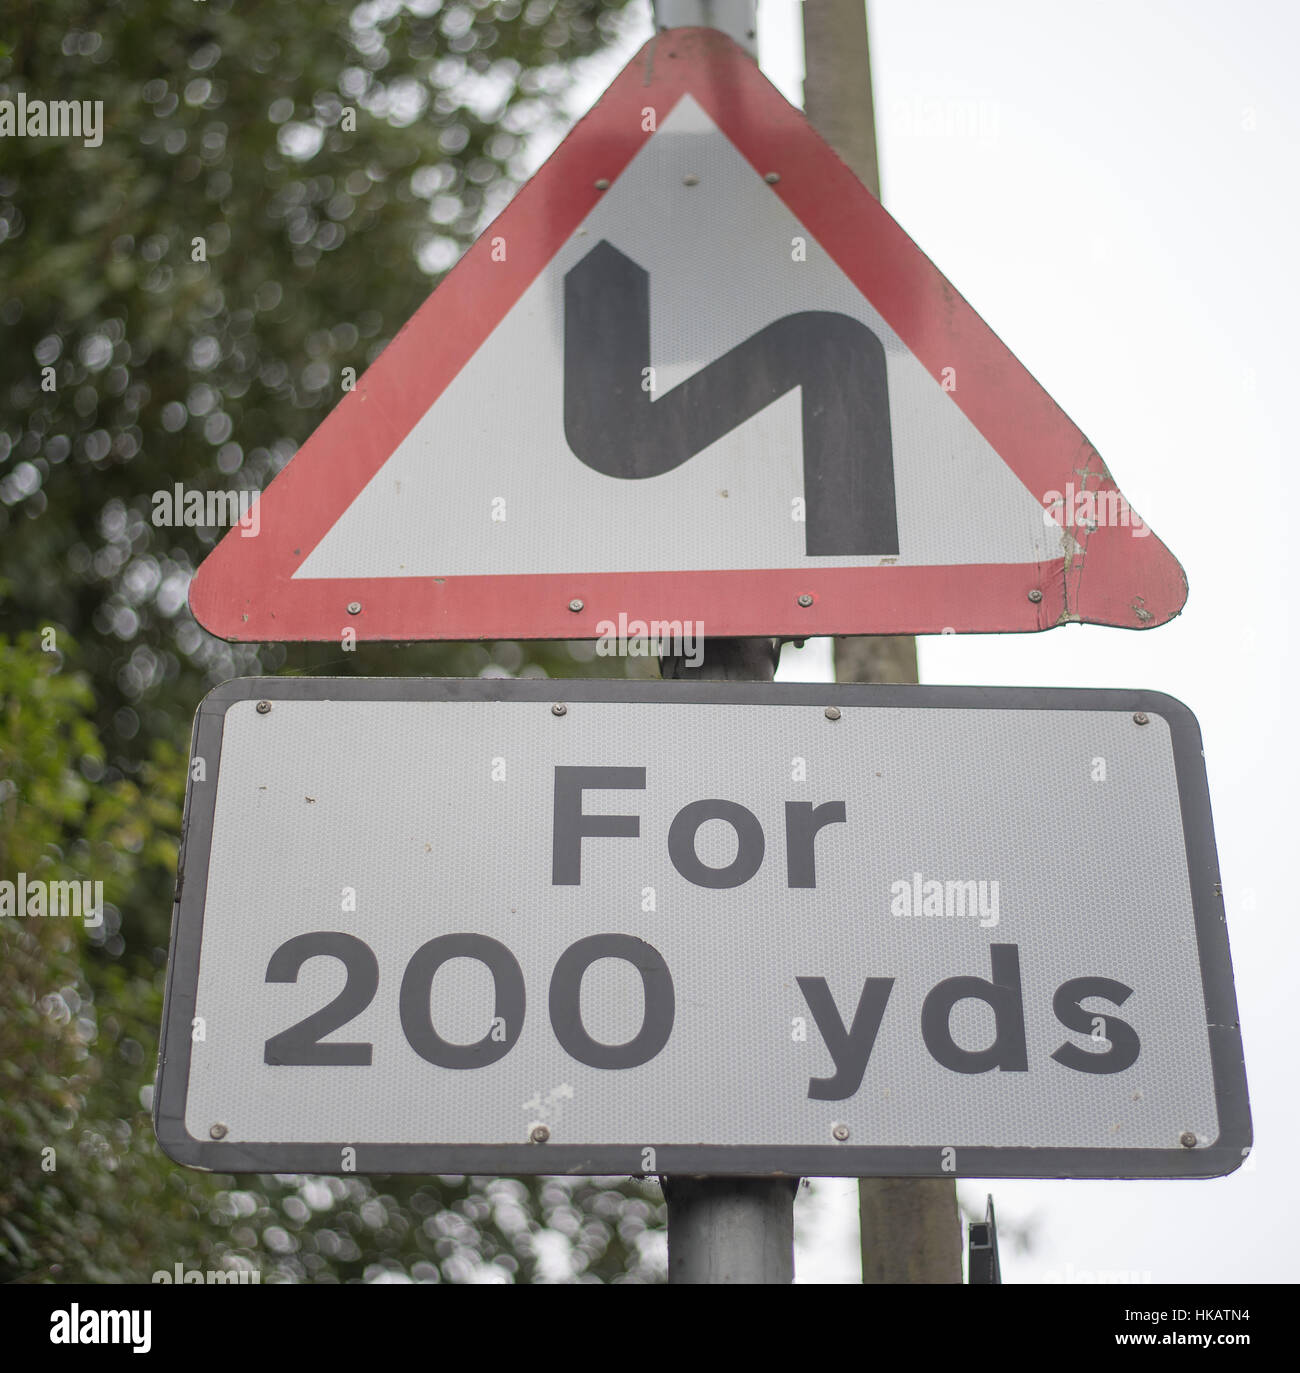 Bends in road, UK urban road sign Stock Photo